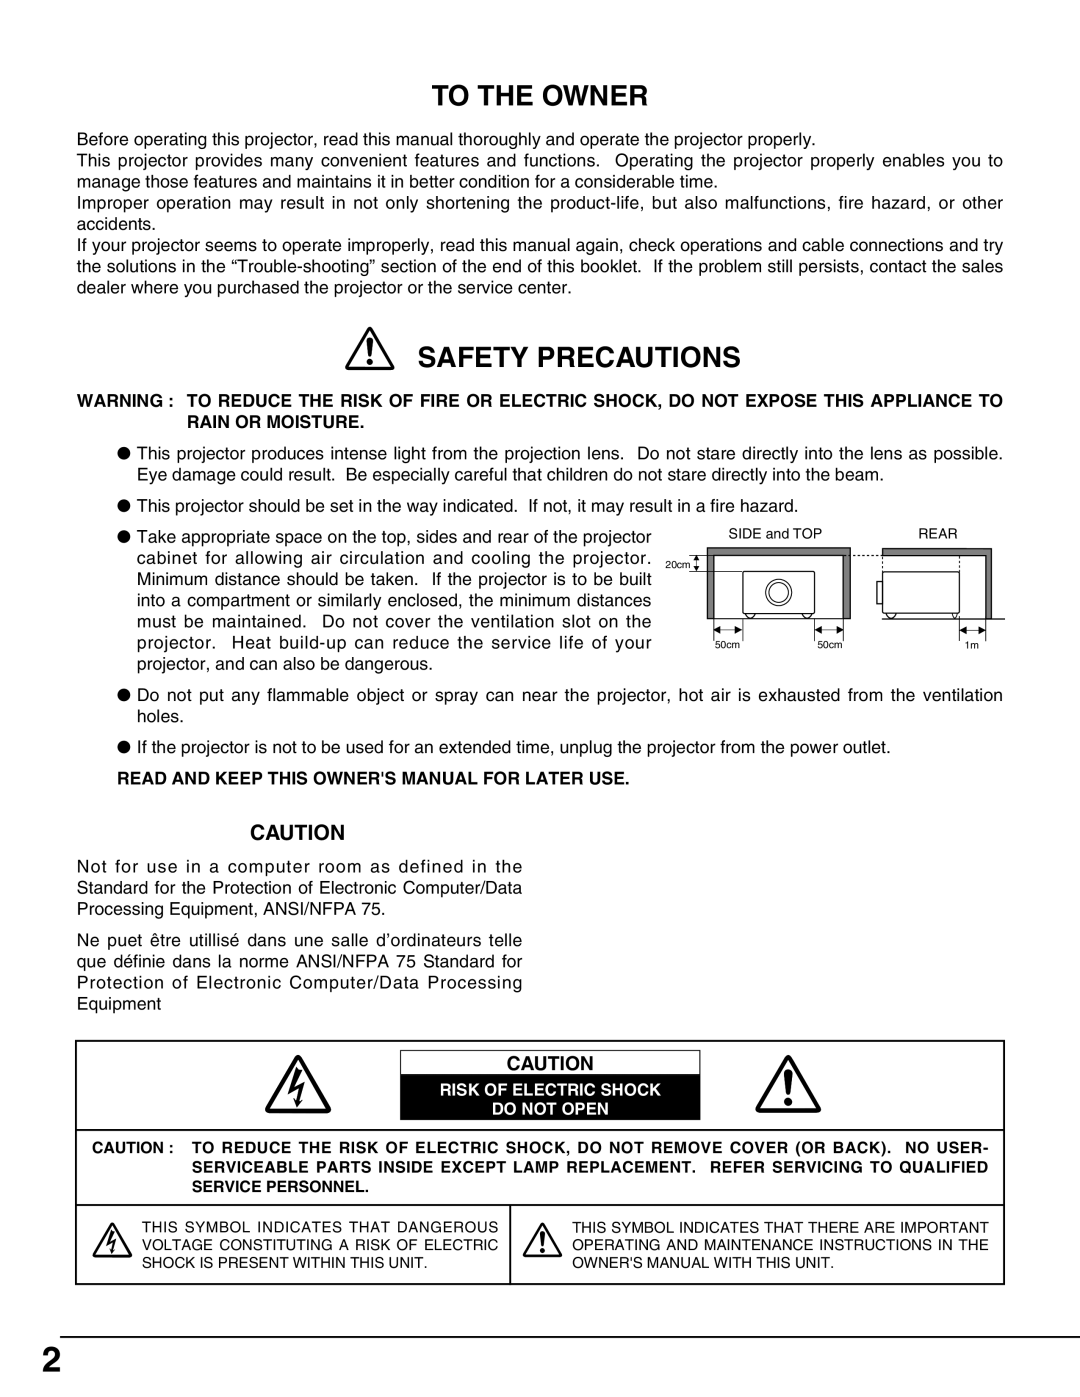 Sanyo PLV-HD150 owner manual To The Owner, Safety Precautions, Read And Keep This Owners Manual For Later Use 